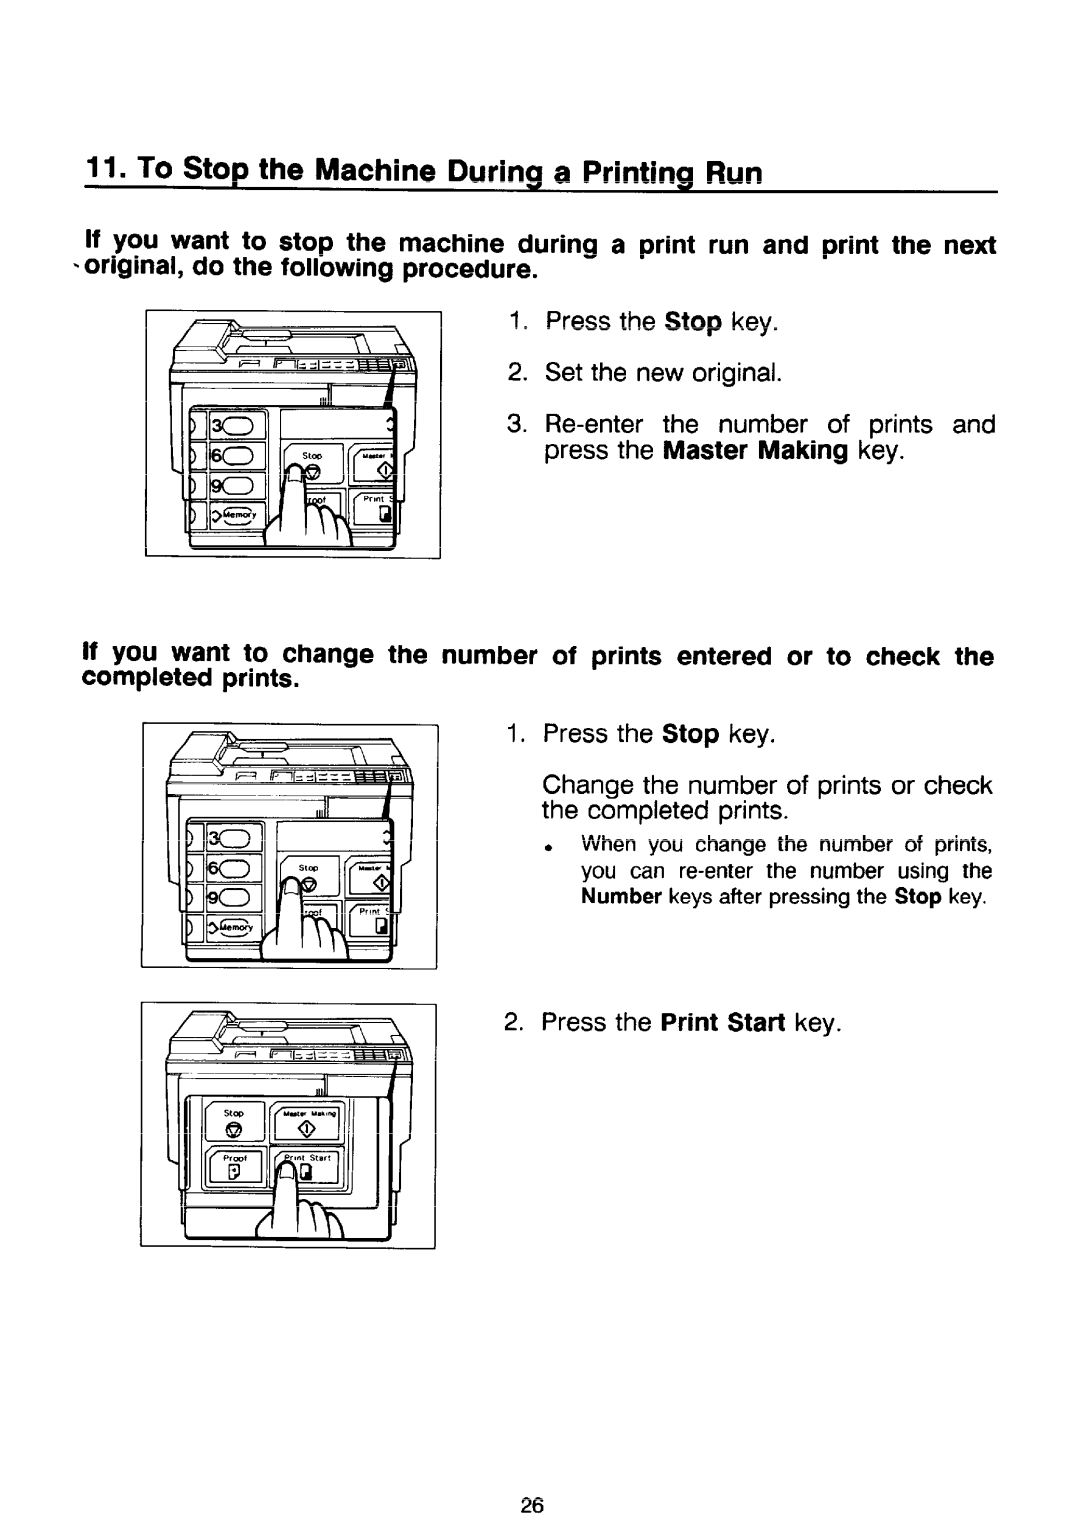 Ricoh PRIPORT VT2130 manual To Stop the Machine During a Printing Run, original, do the following procedure 